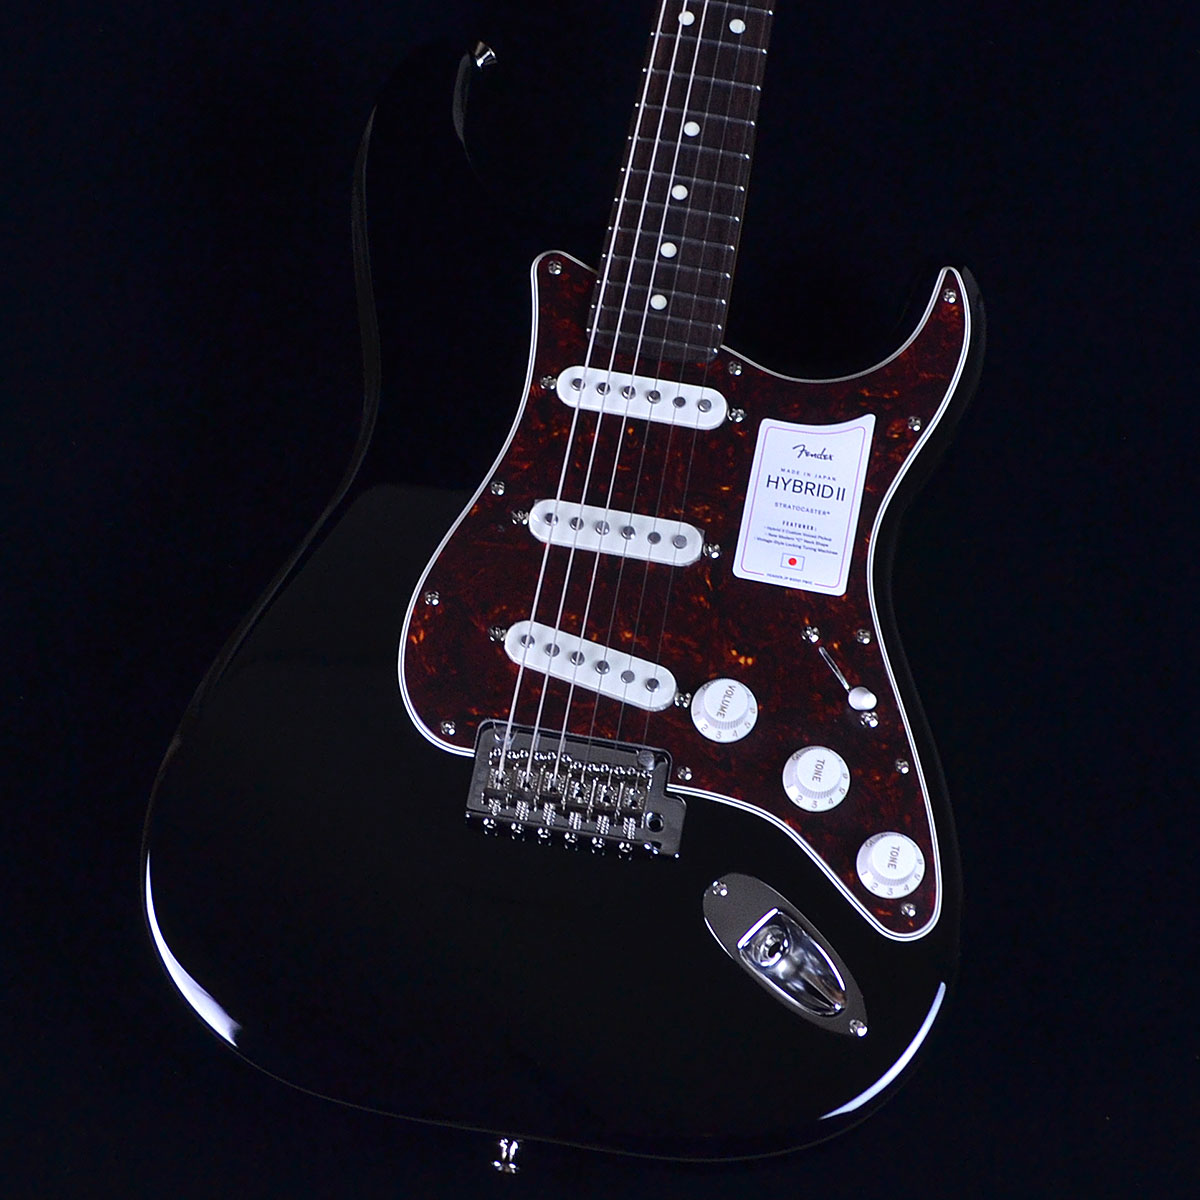 Fender Made In Japan Hybrid II Stratocaster Black エレキギター 【フェンダー ジャパン